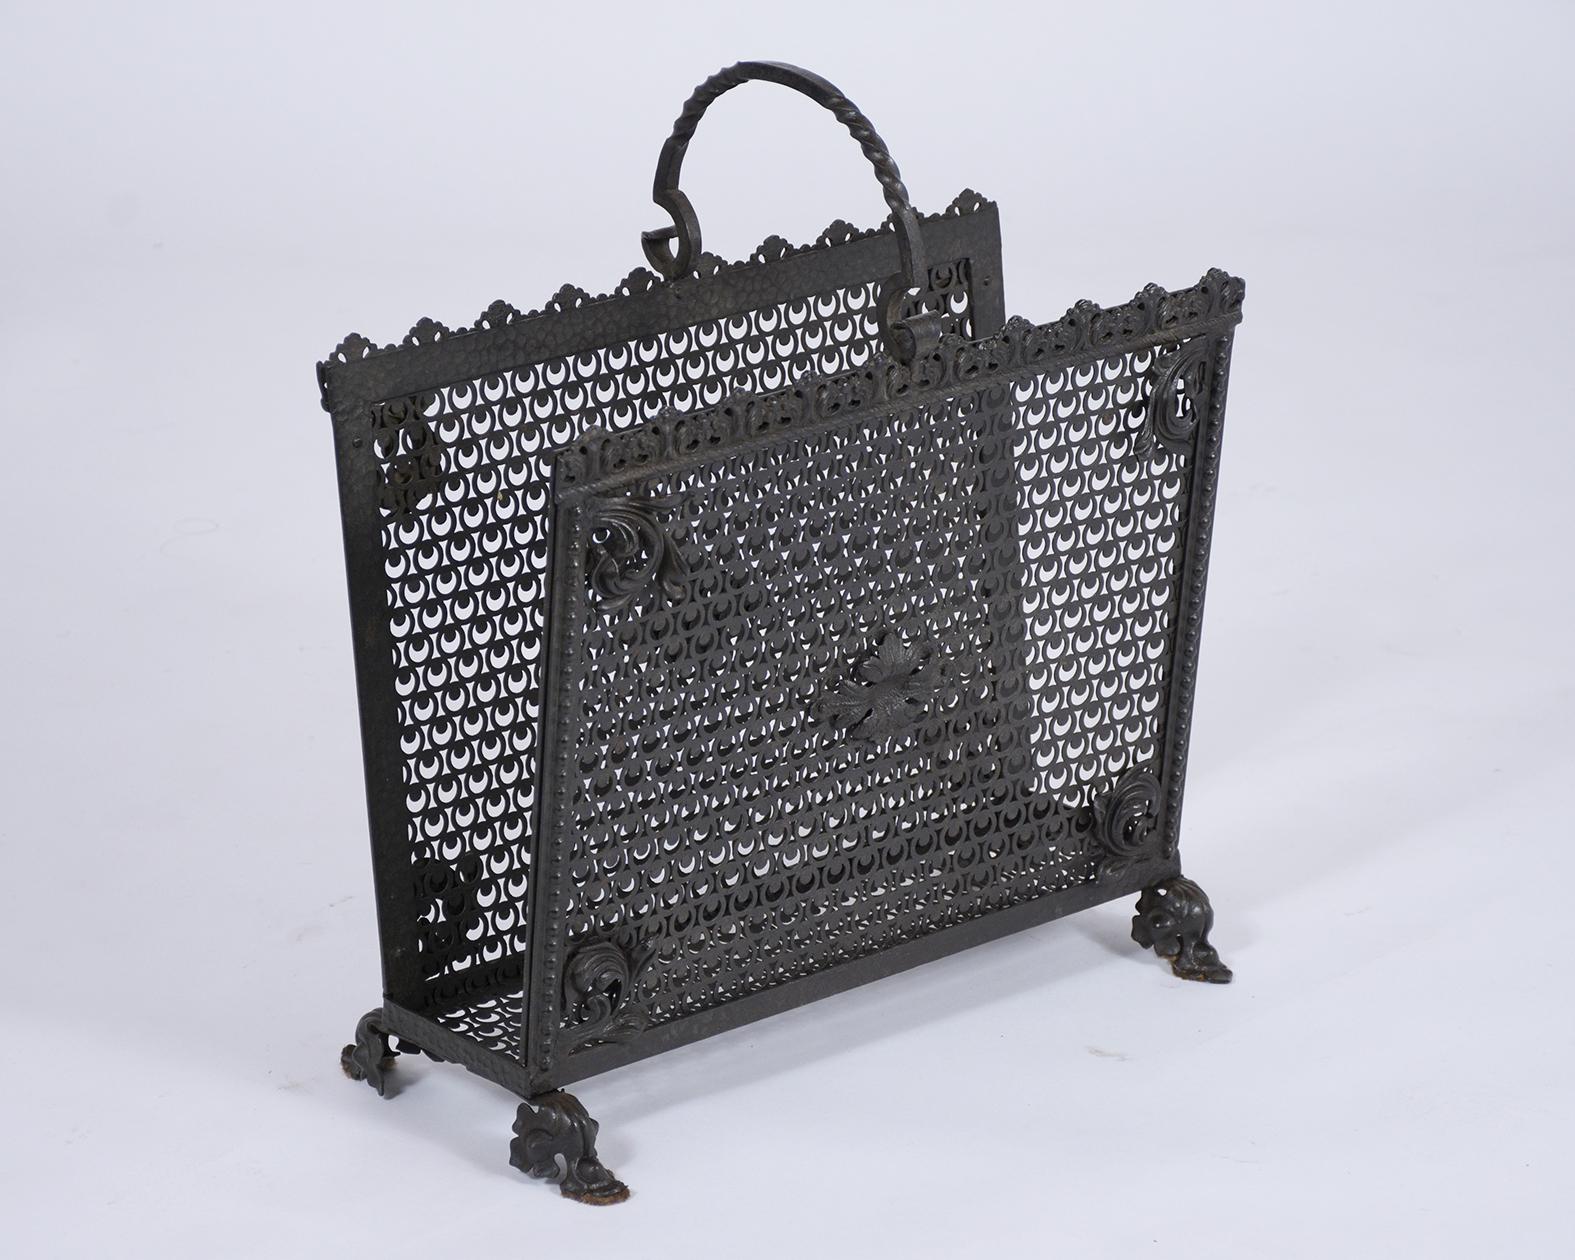 An antique wrought iron rack magazine made out of iron, this unique piece features a beautiful design forge crafted details and has been painted in black color with a beautiful patina finish.